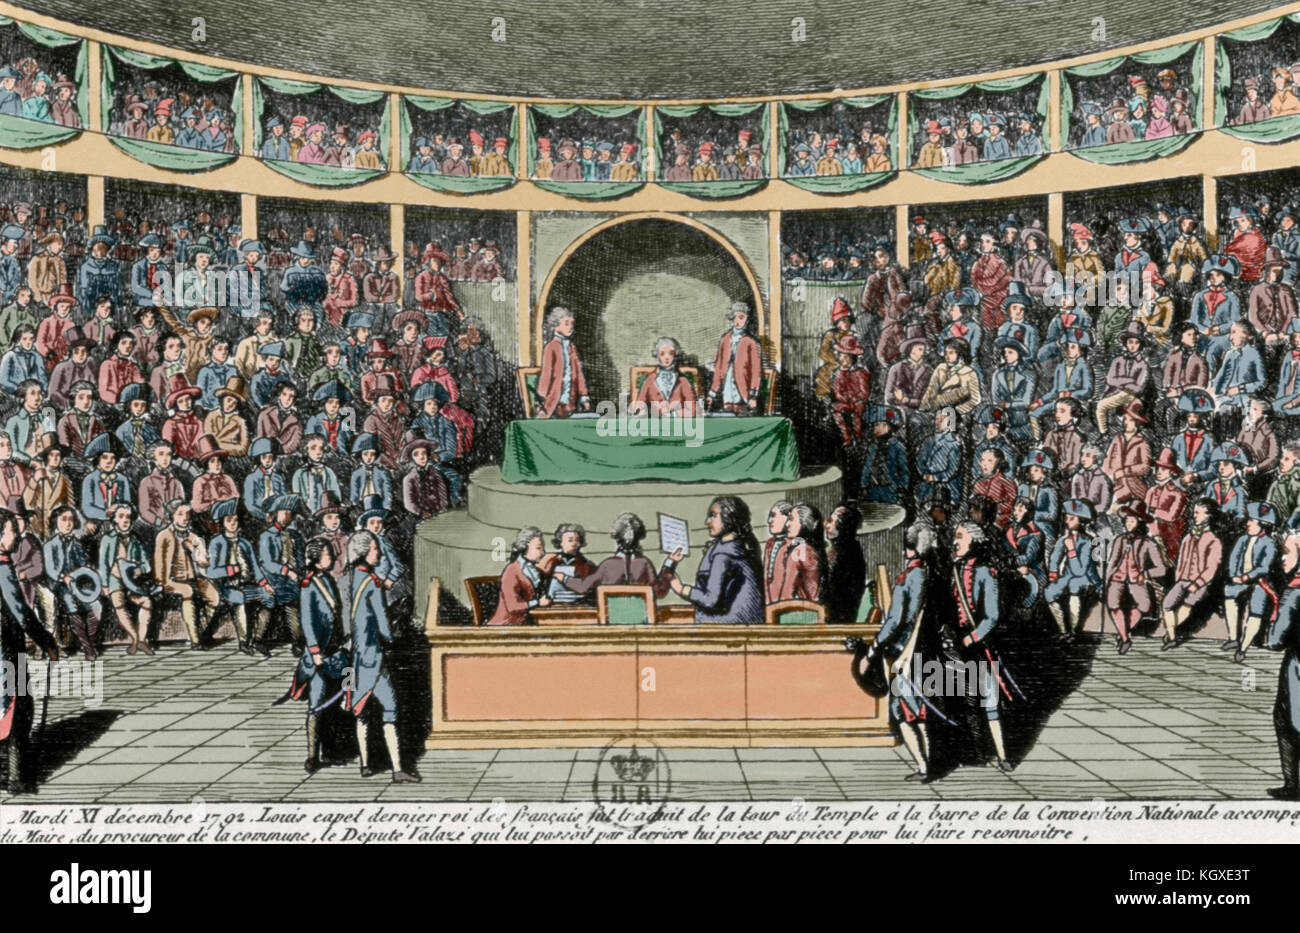 French Revolution (1789-1799). National Convention. Interrogation of King Louis XVI before the National Convention, December 11, 1792.  Colored engraving. Stock Photo